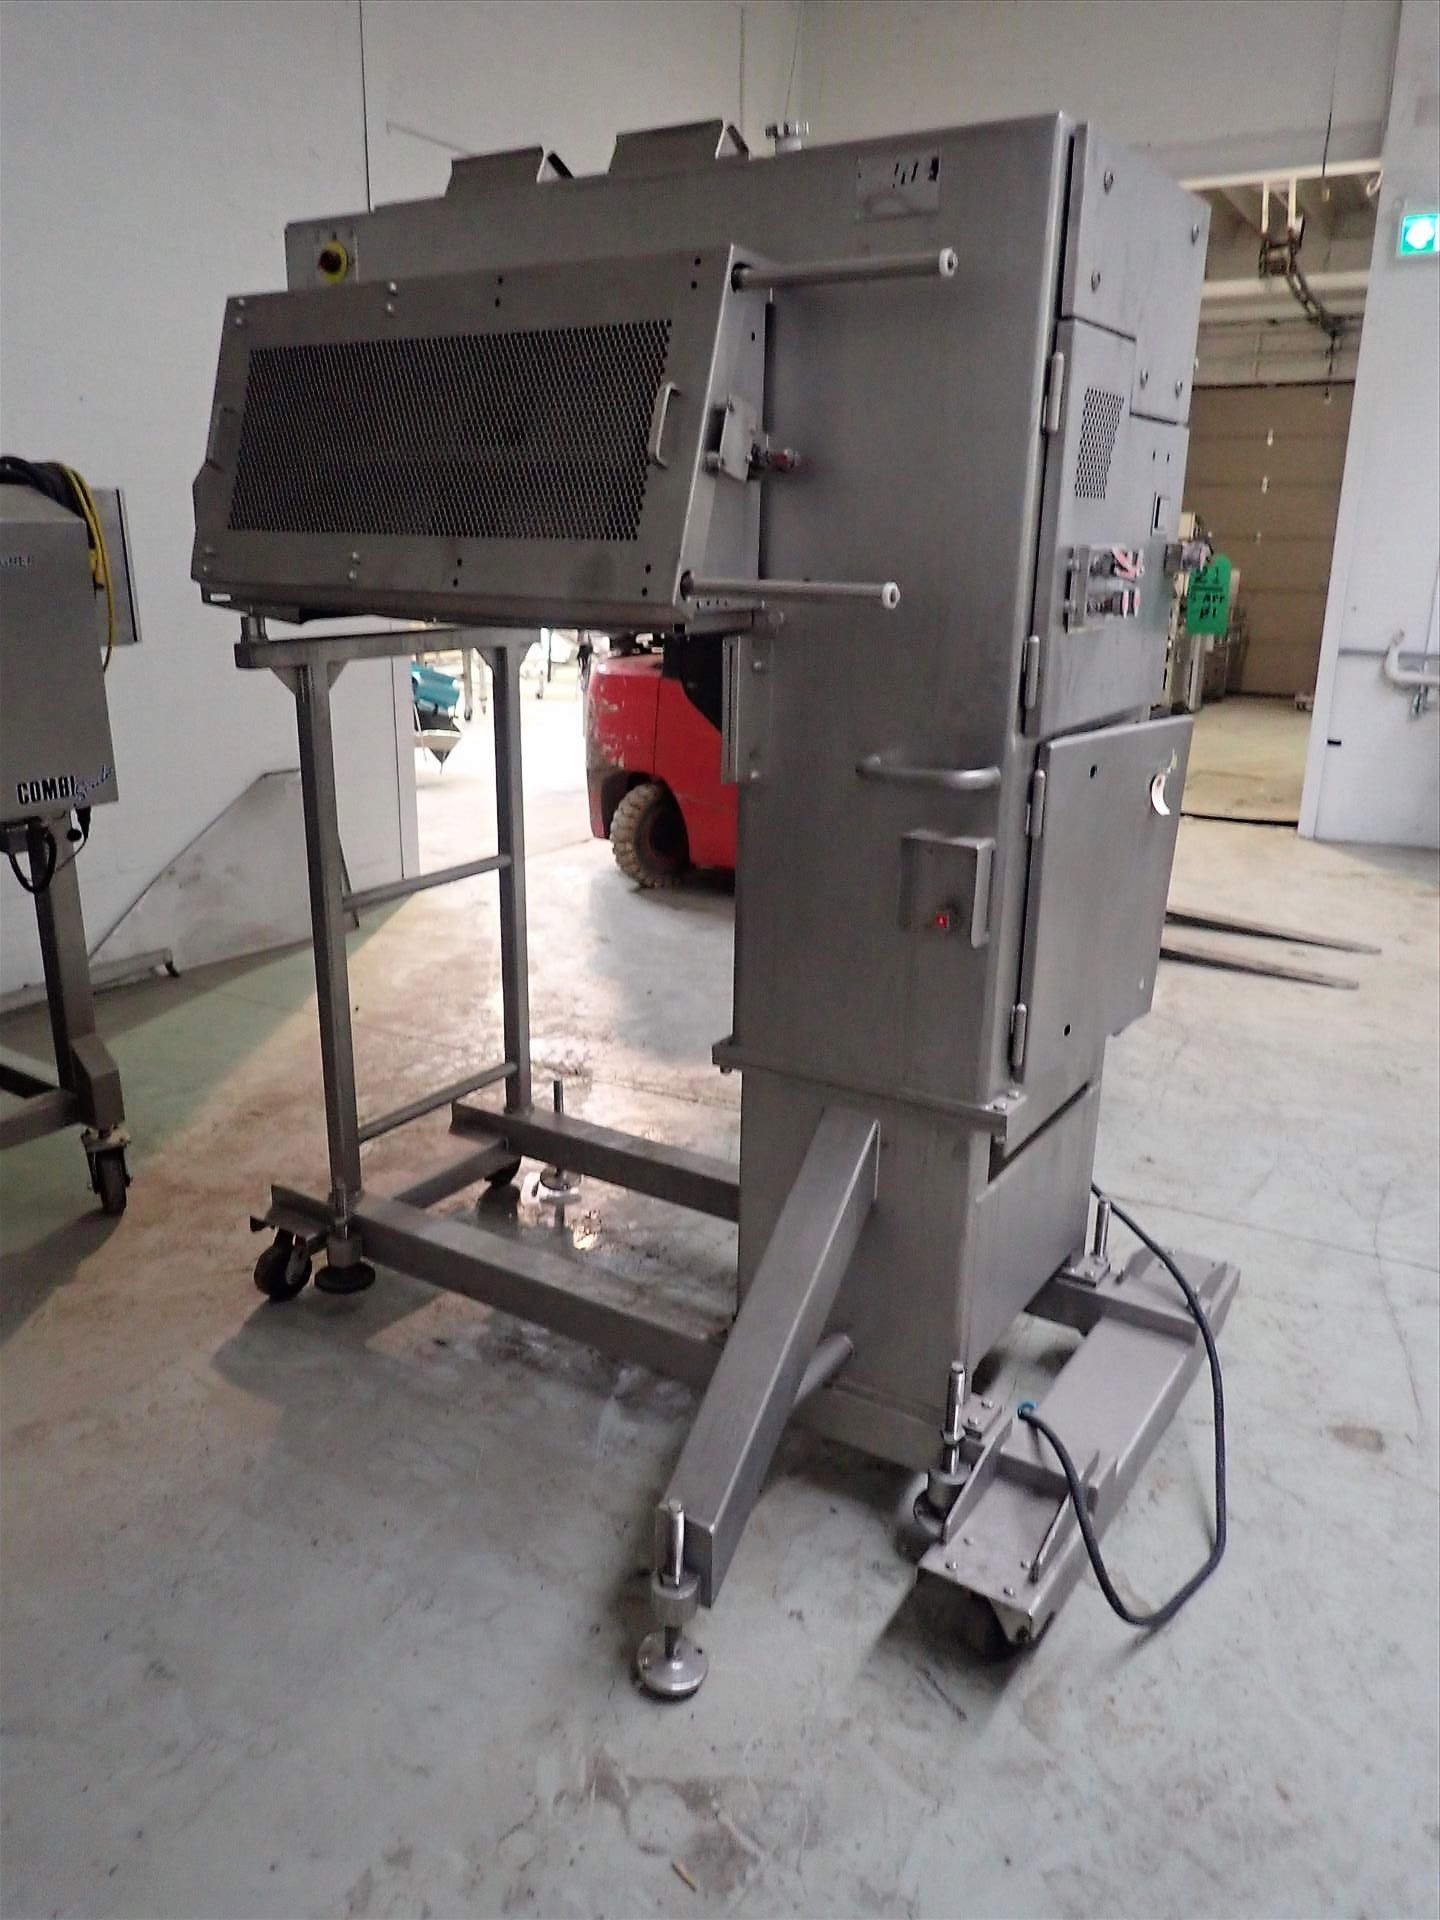 Grote slicer/applicator, s/s, mod. S/A-530-SD, ser. no. 1150474 w/ PanelView C1000 touch-screen - Image 3 of 8